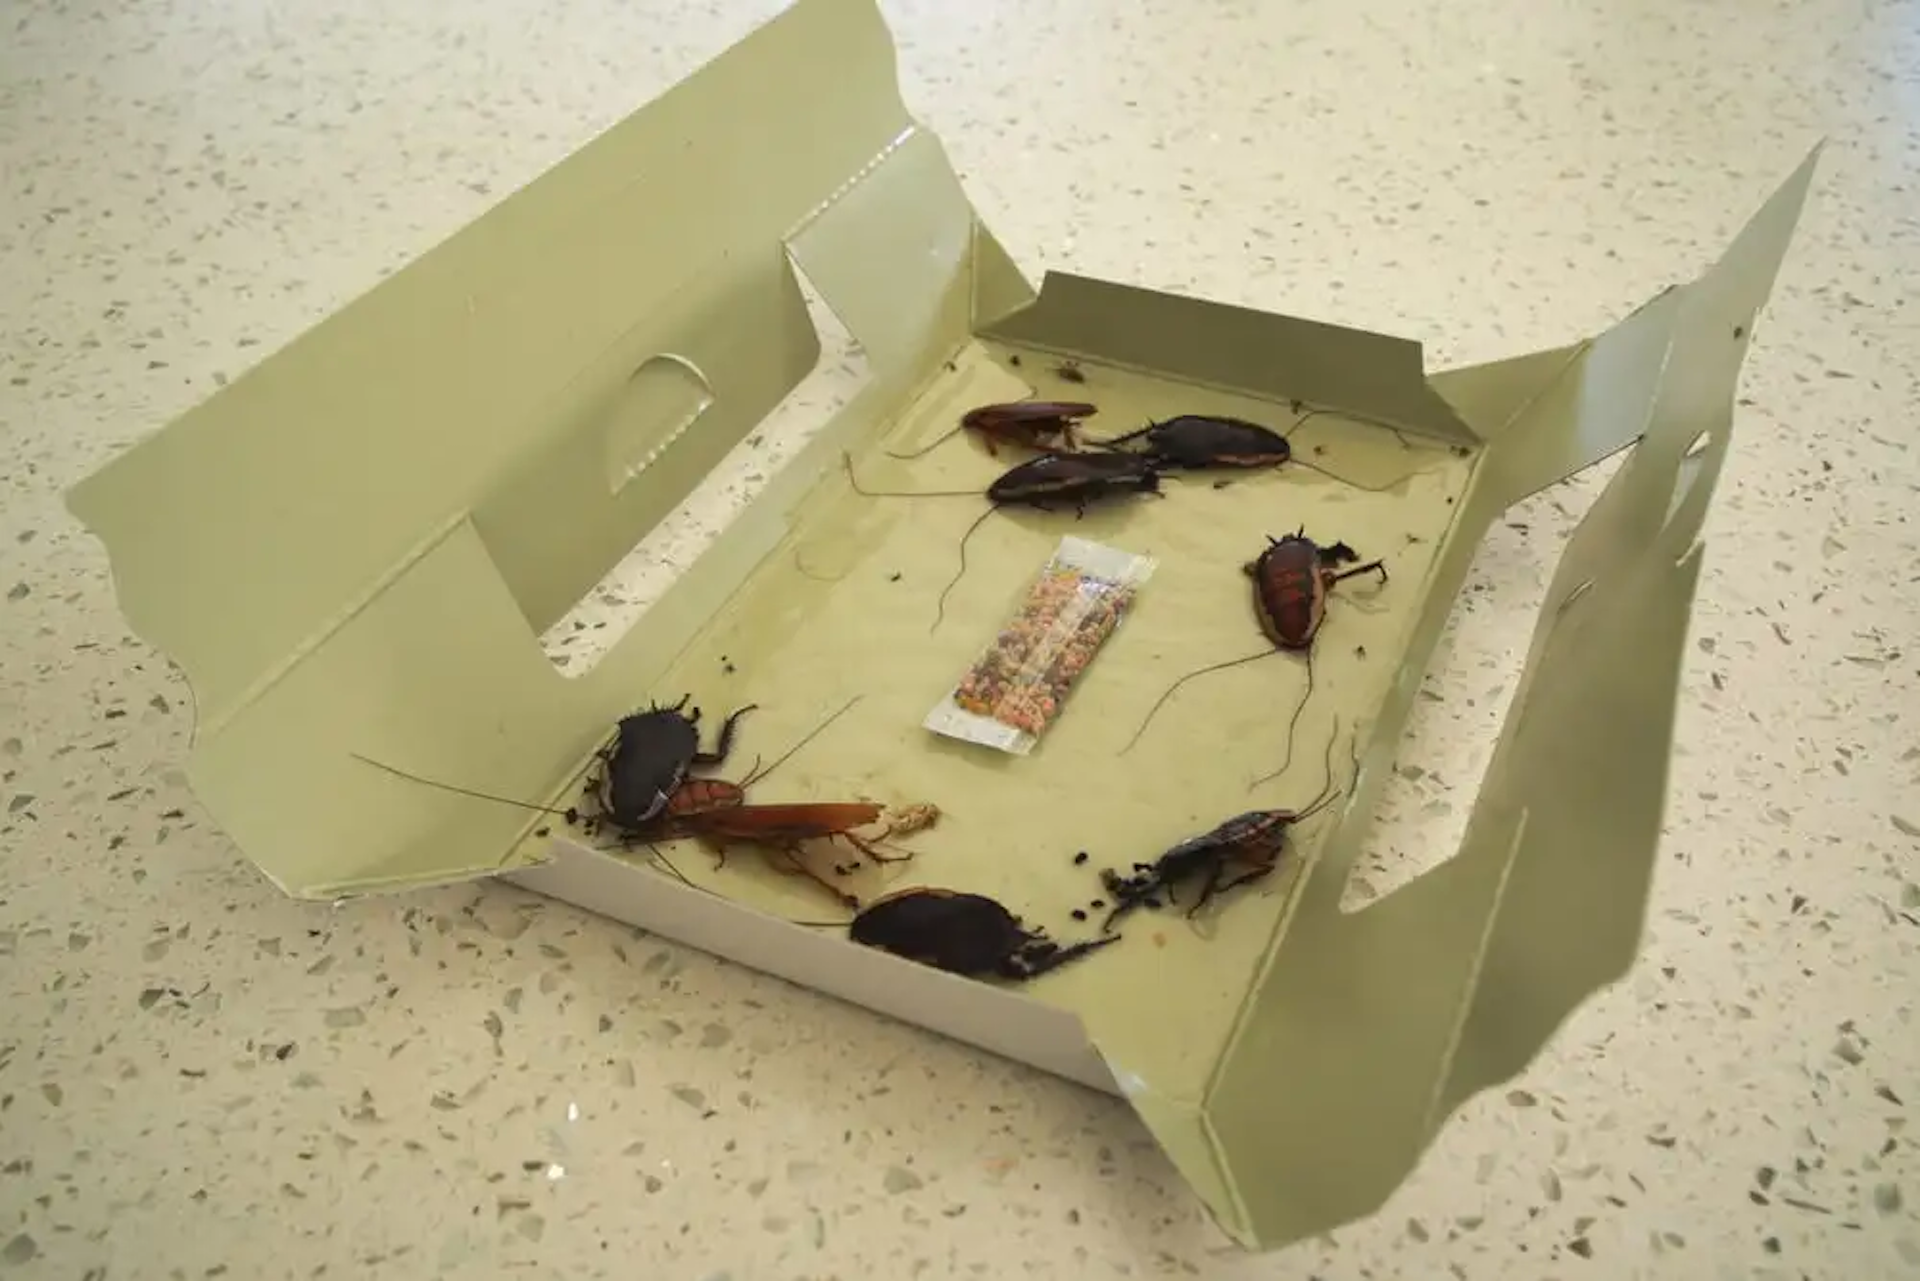 sticky, adhesive-lined sheets are often treated with a bait 